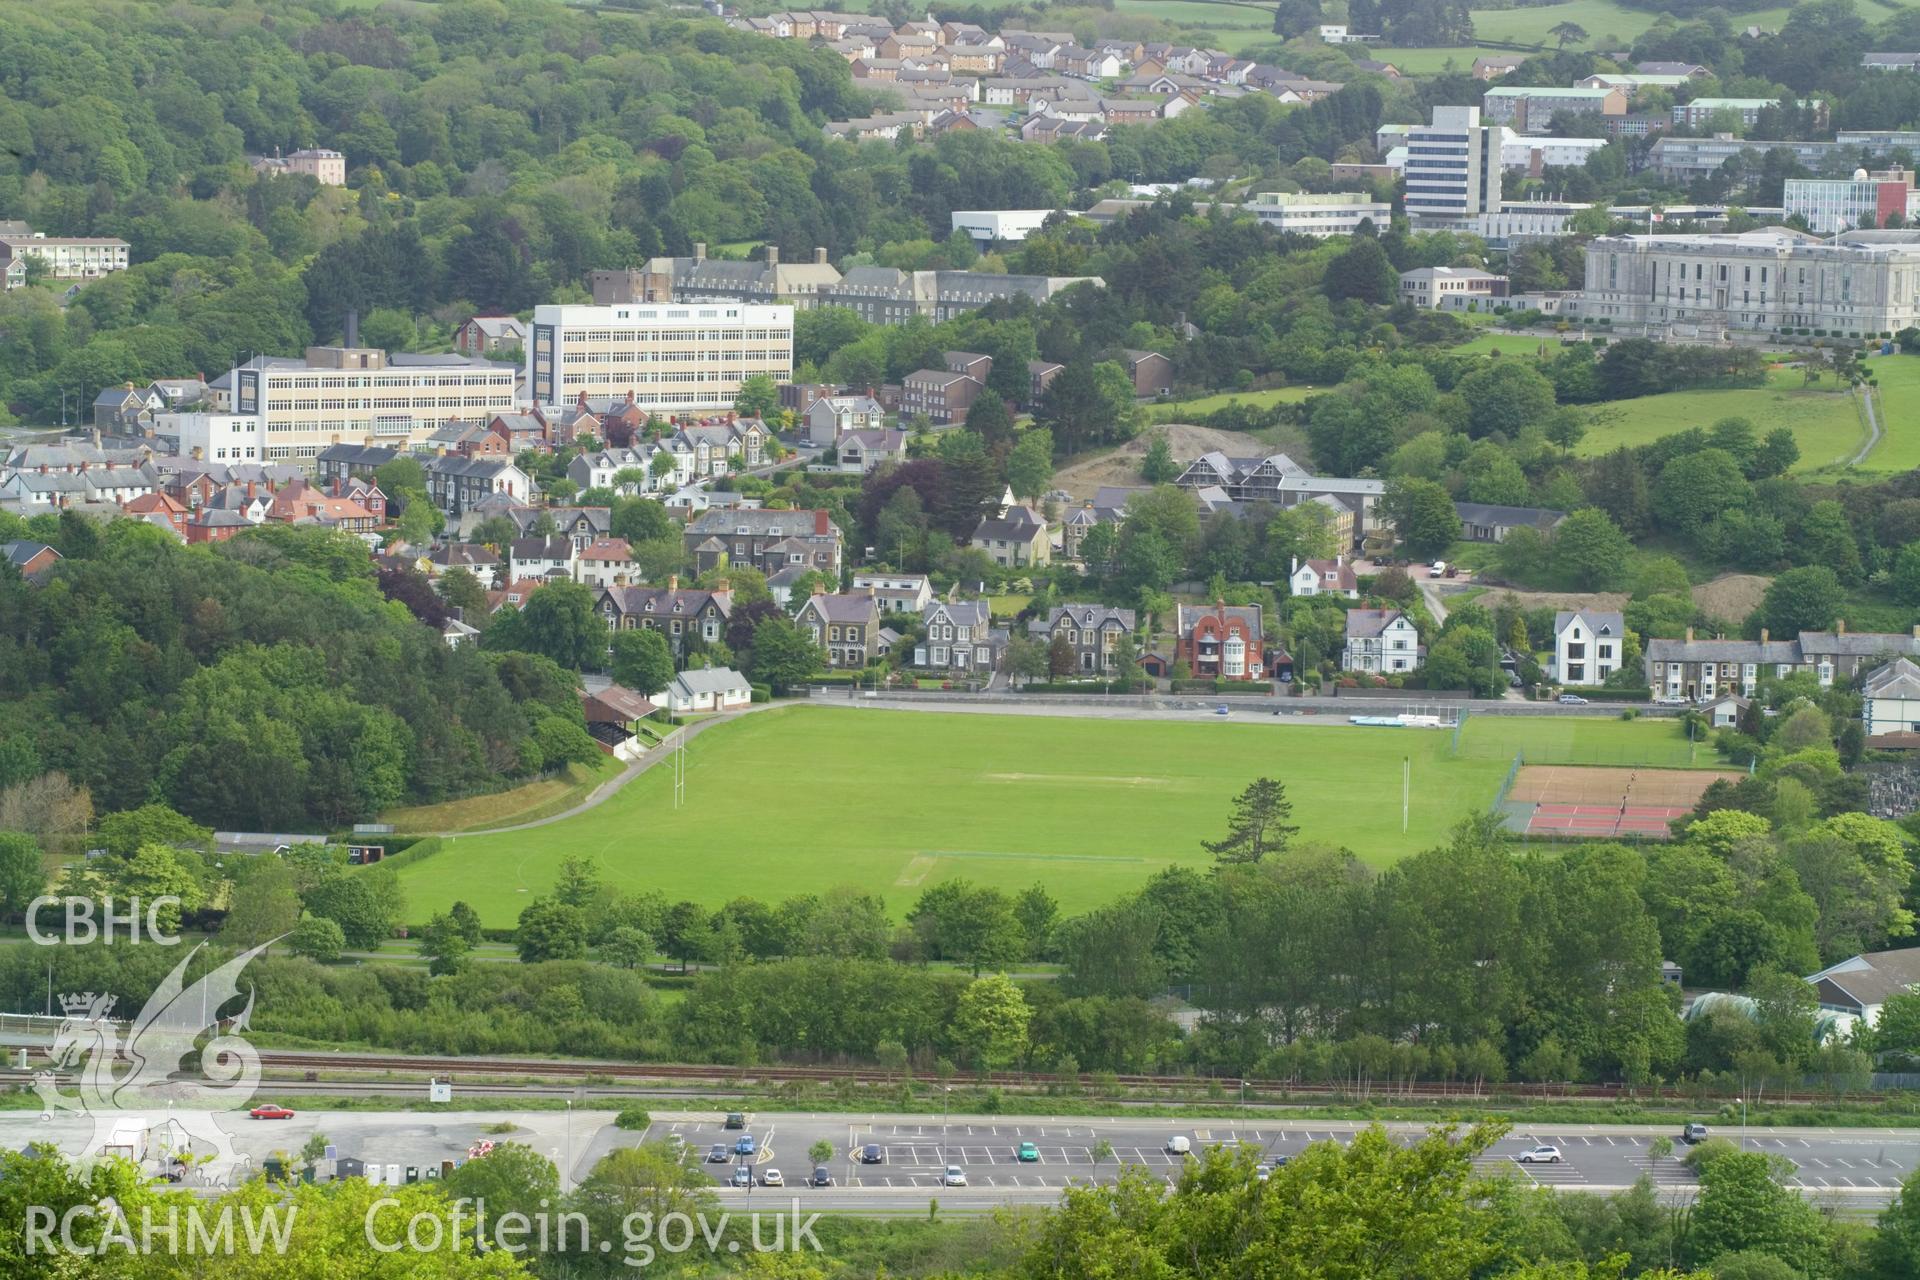 Aberystwyth sports ground from the south.